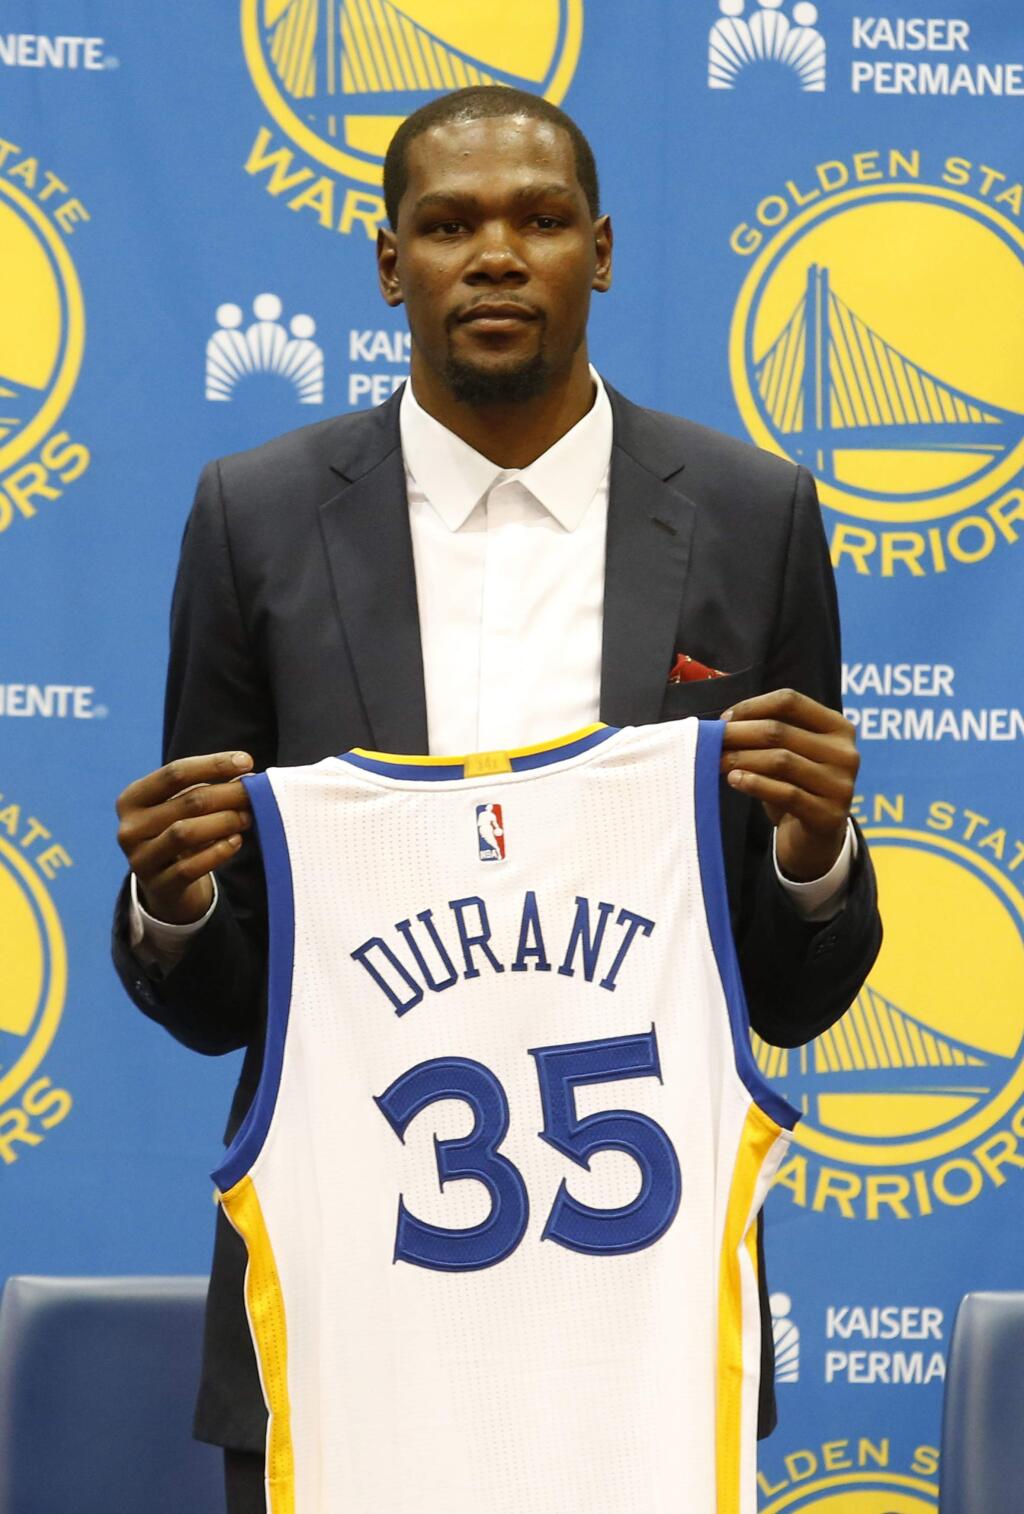 Golden State Warriors' Kevin Durant holds up his jersey after he was introduced during a news conference at the NBA basketball team's practice facility, Thursday, July 7, 2016, in Oakland, Calif. (AP Photo/Beck Diefenbach)